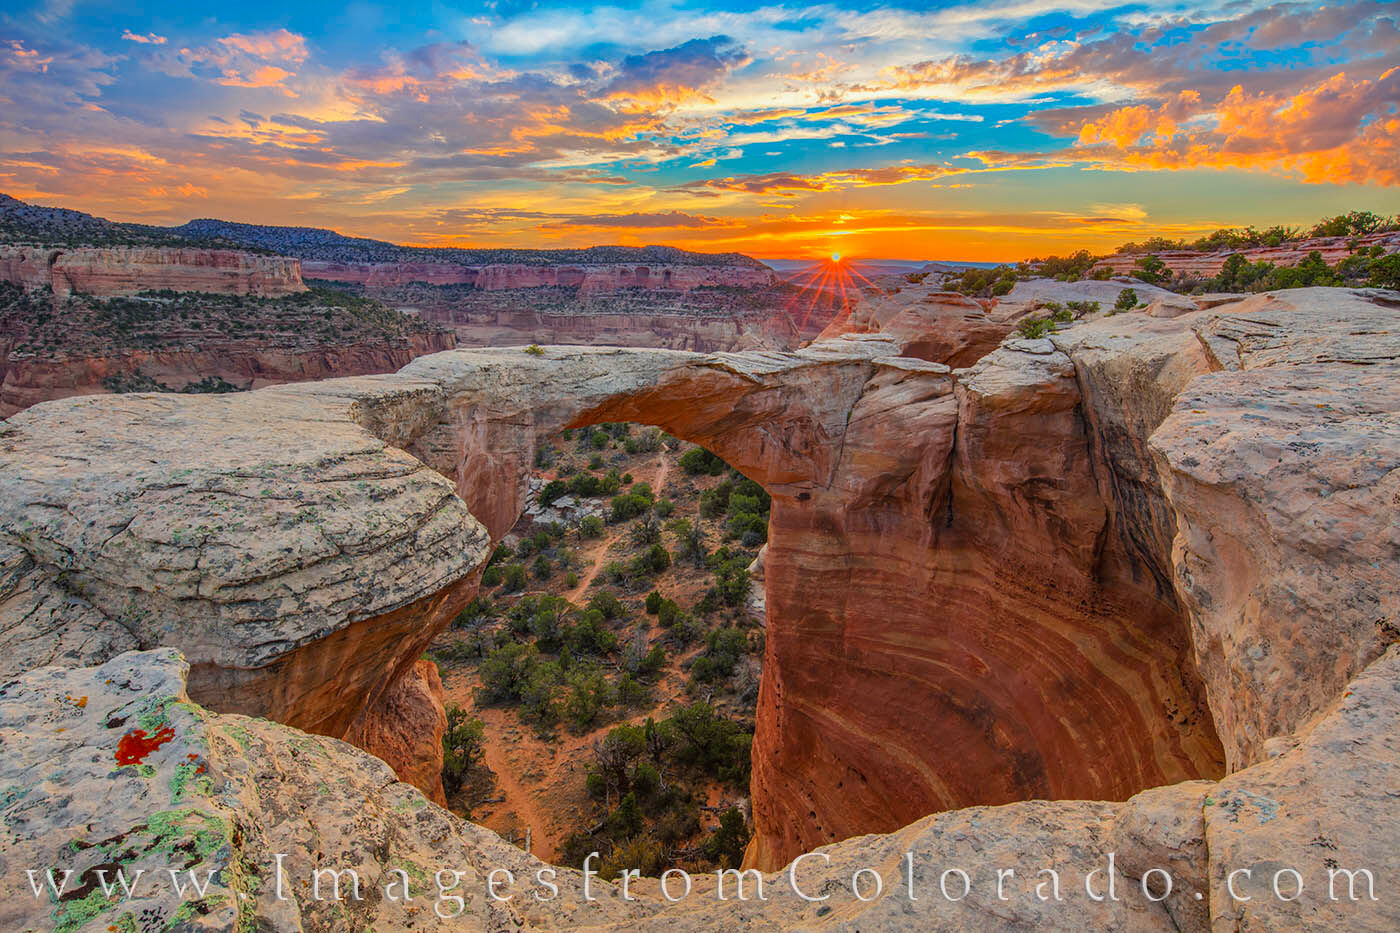 From iconic Rattlesnake Arch in Rattlesnake Canyon, the evening sky lights up at the end of a July day. This beautiful area is...